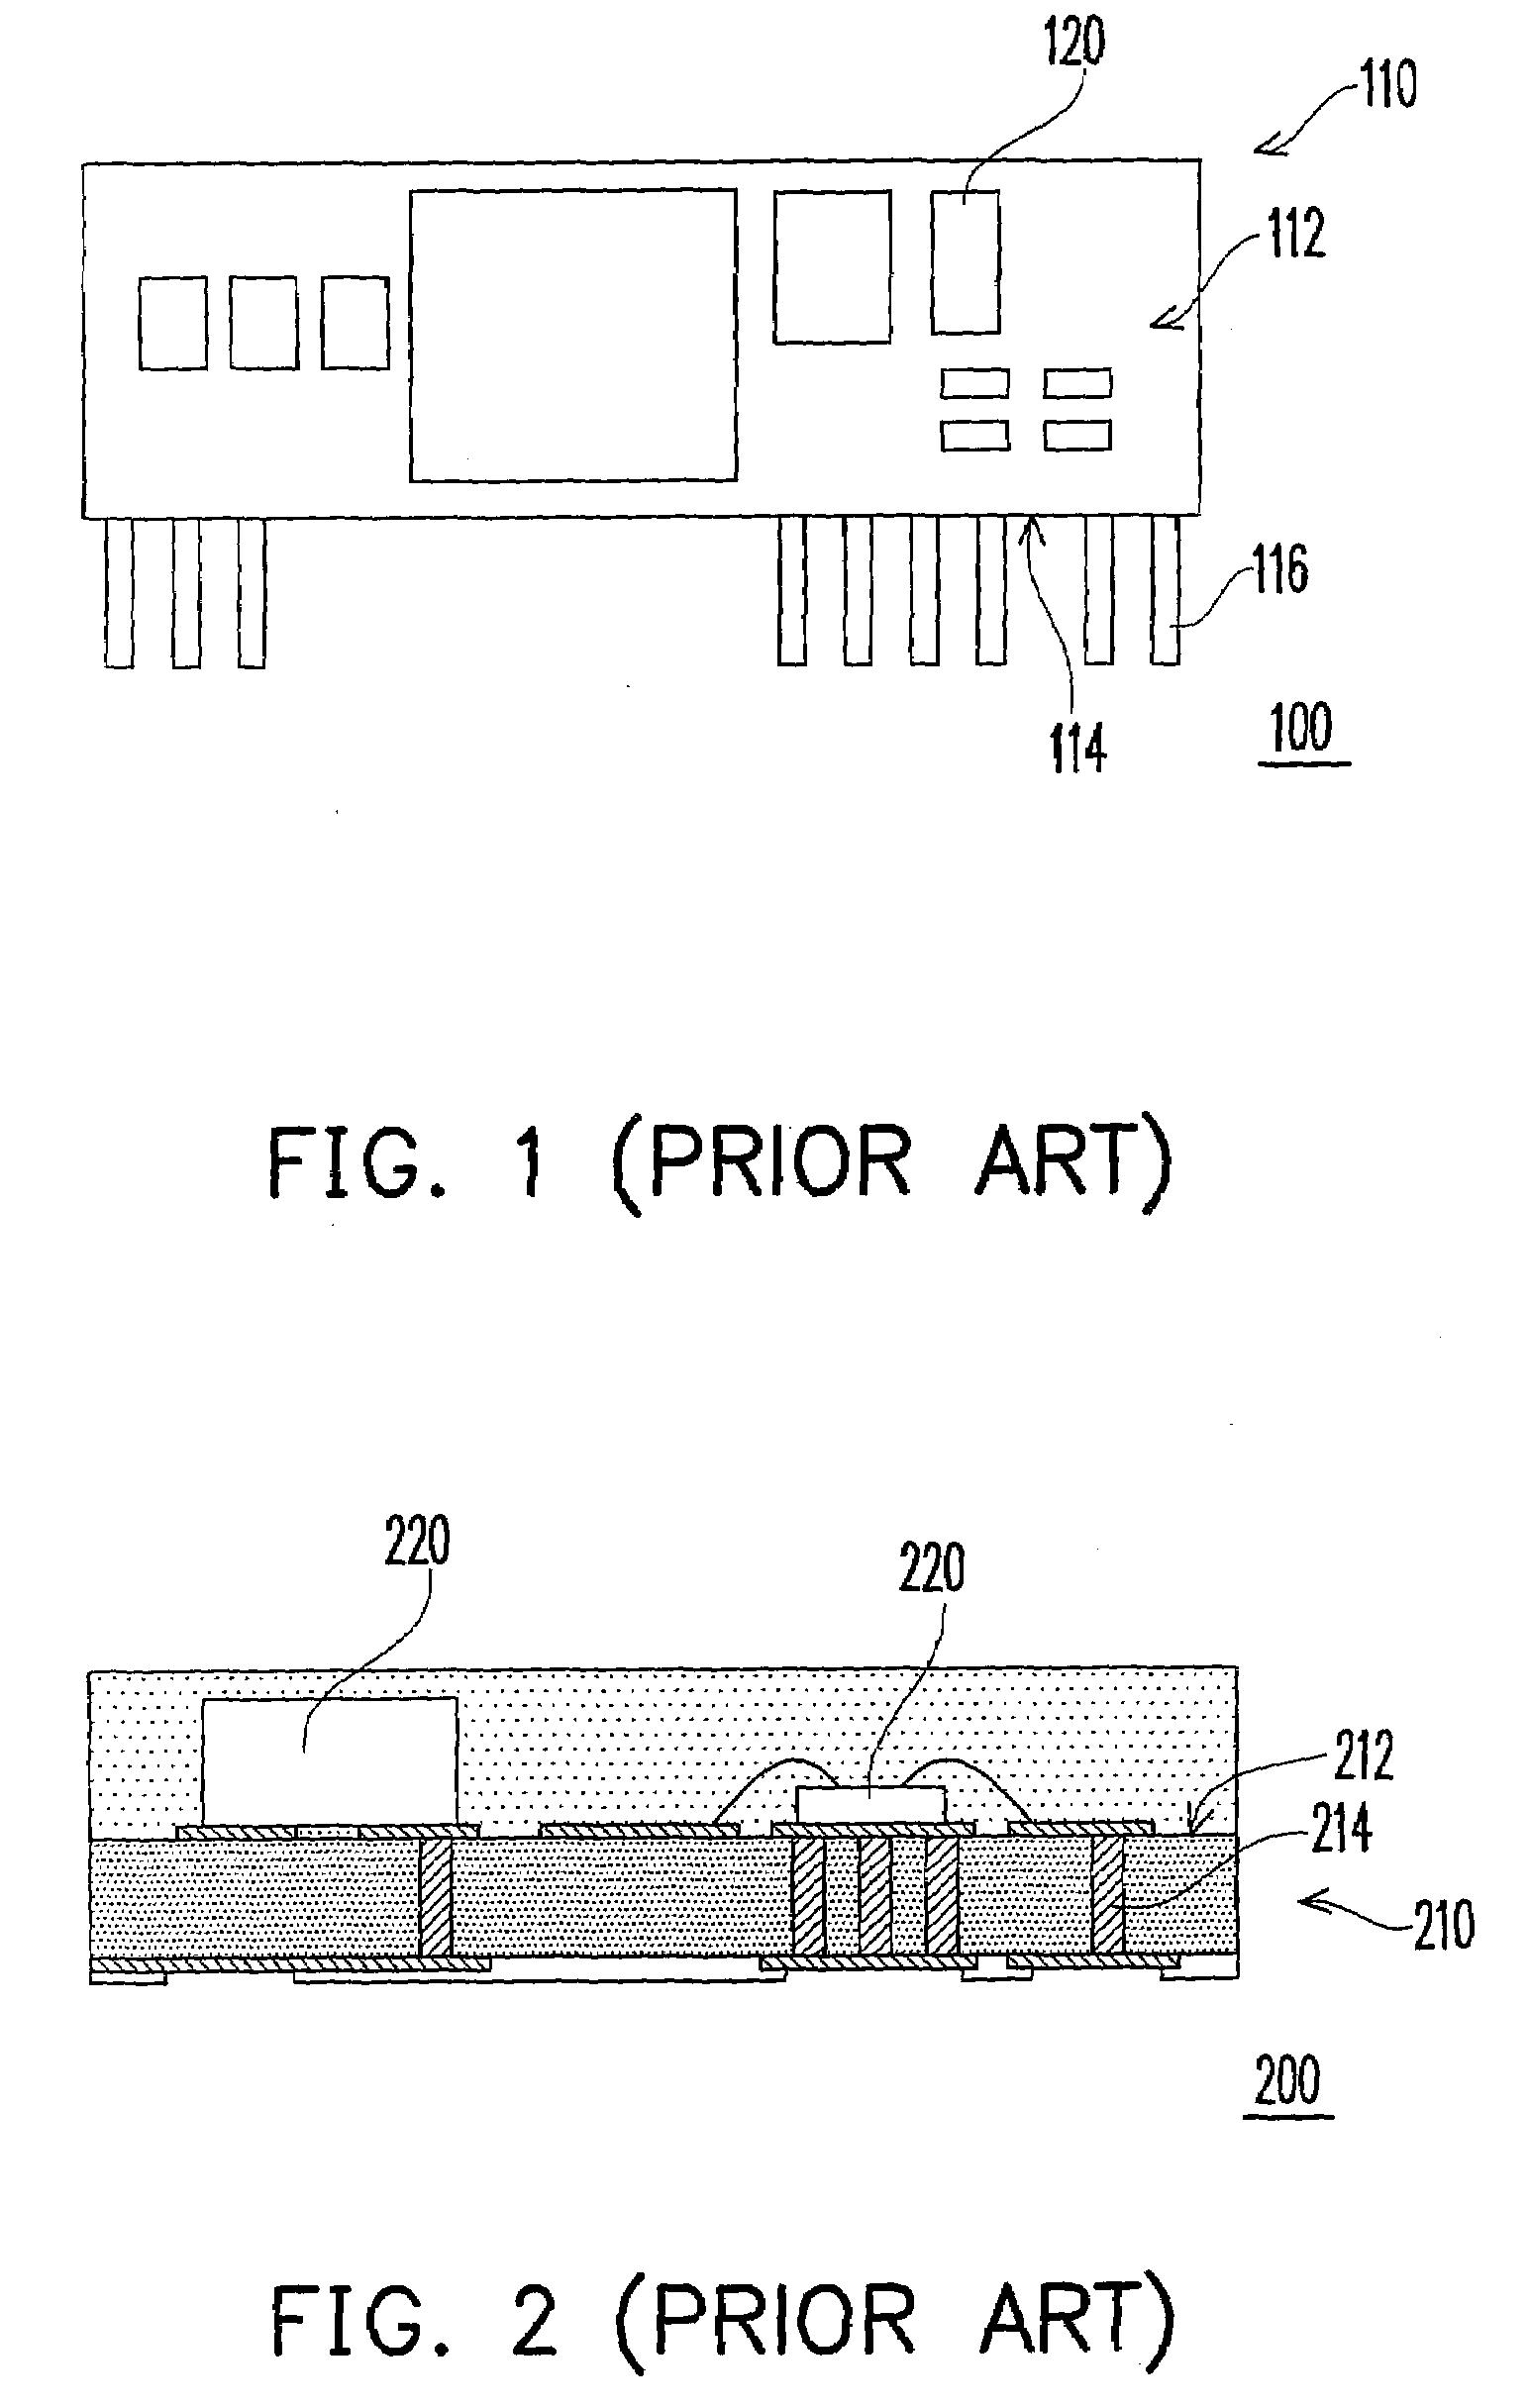 Electronic package structure